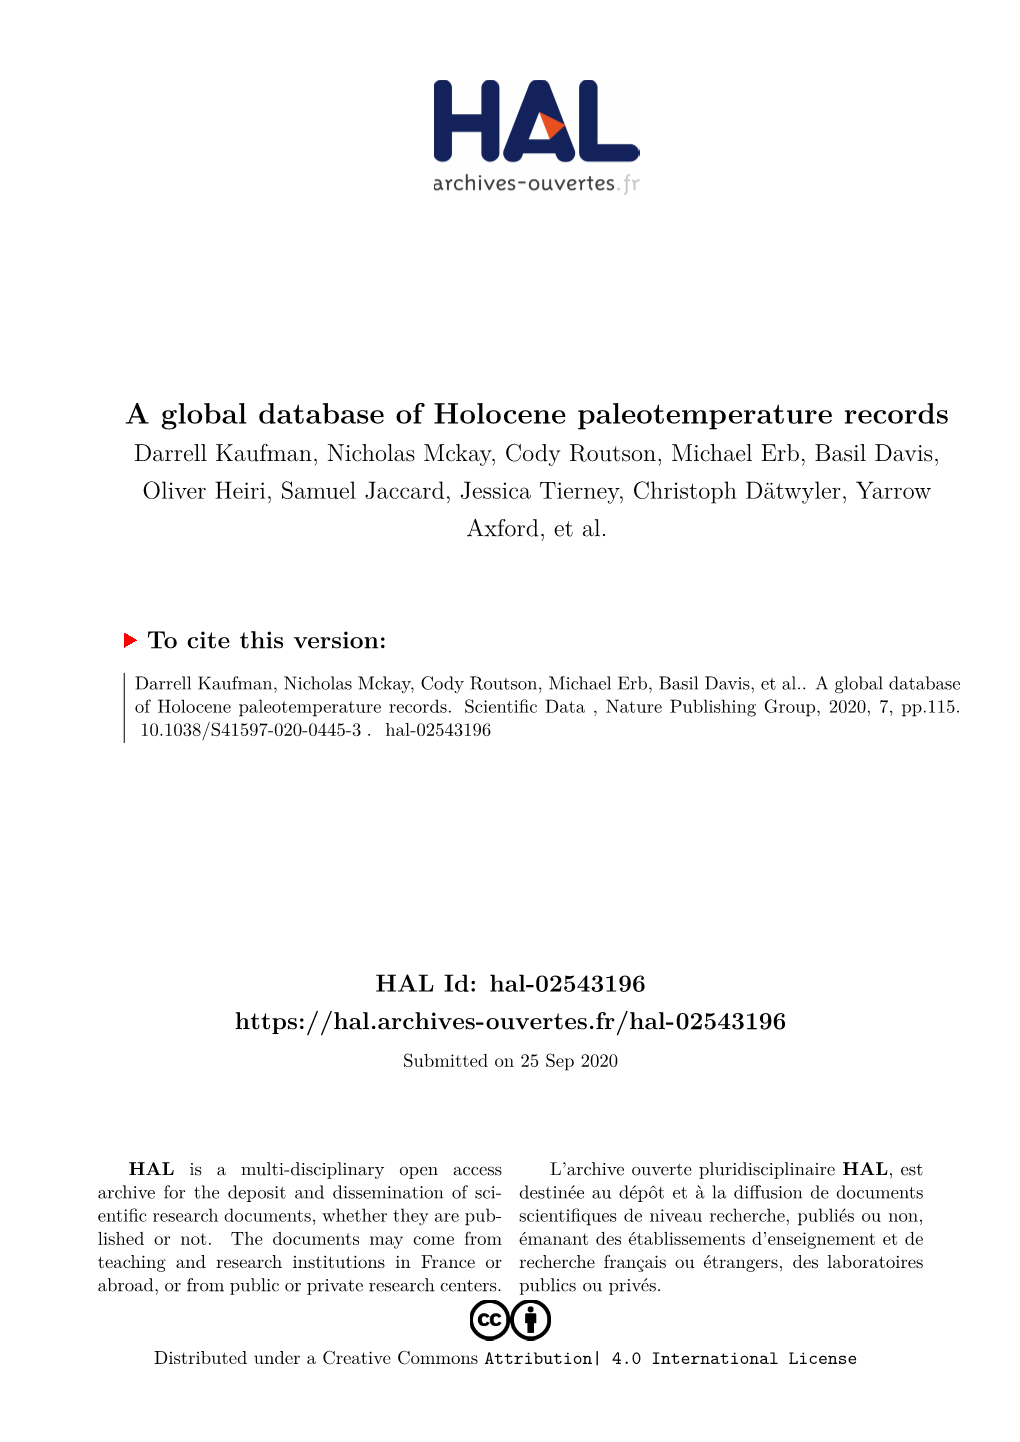 A Global Database of Holocene Paleotemperature Records